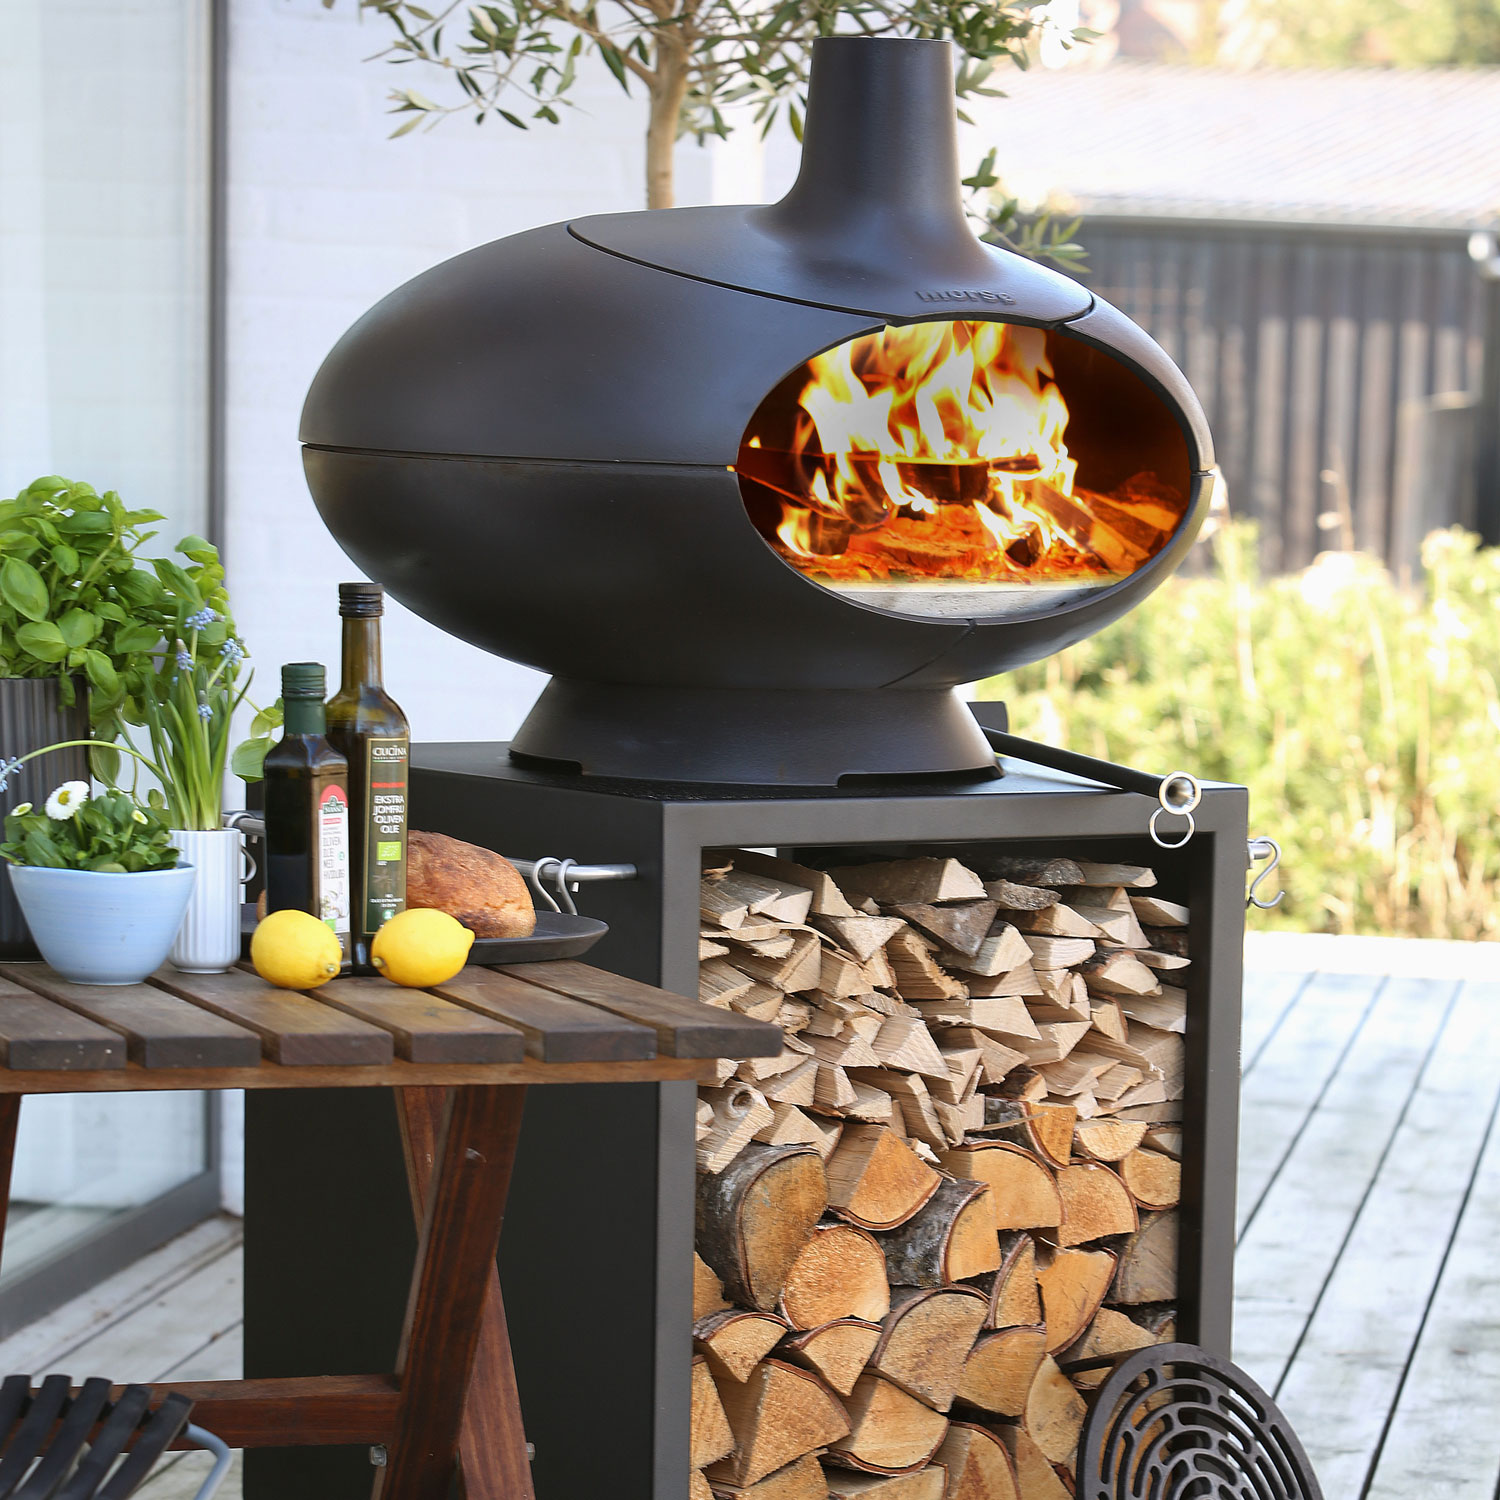 Morso Forno Terra outdoor oven set next to cooking ingredients such as olive oil, lemons and fresh herbs